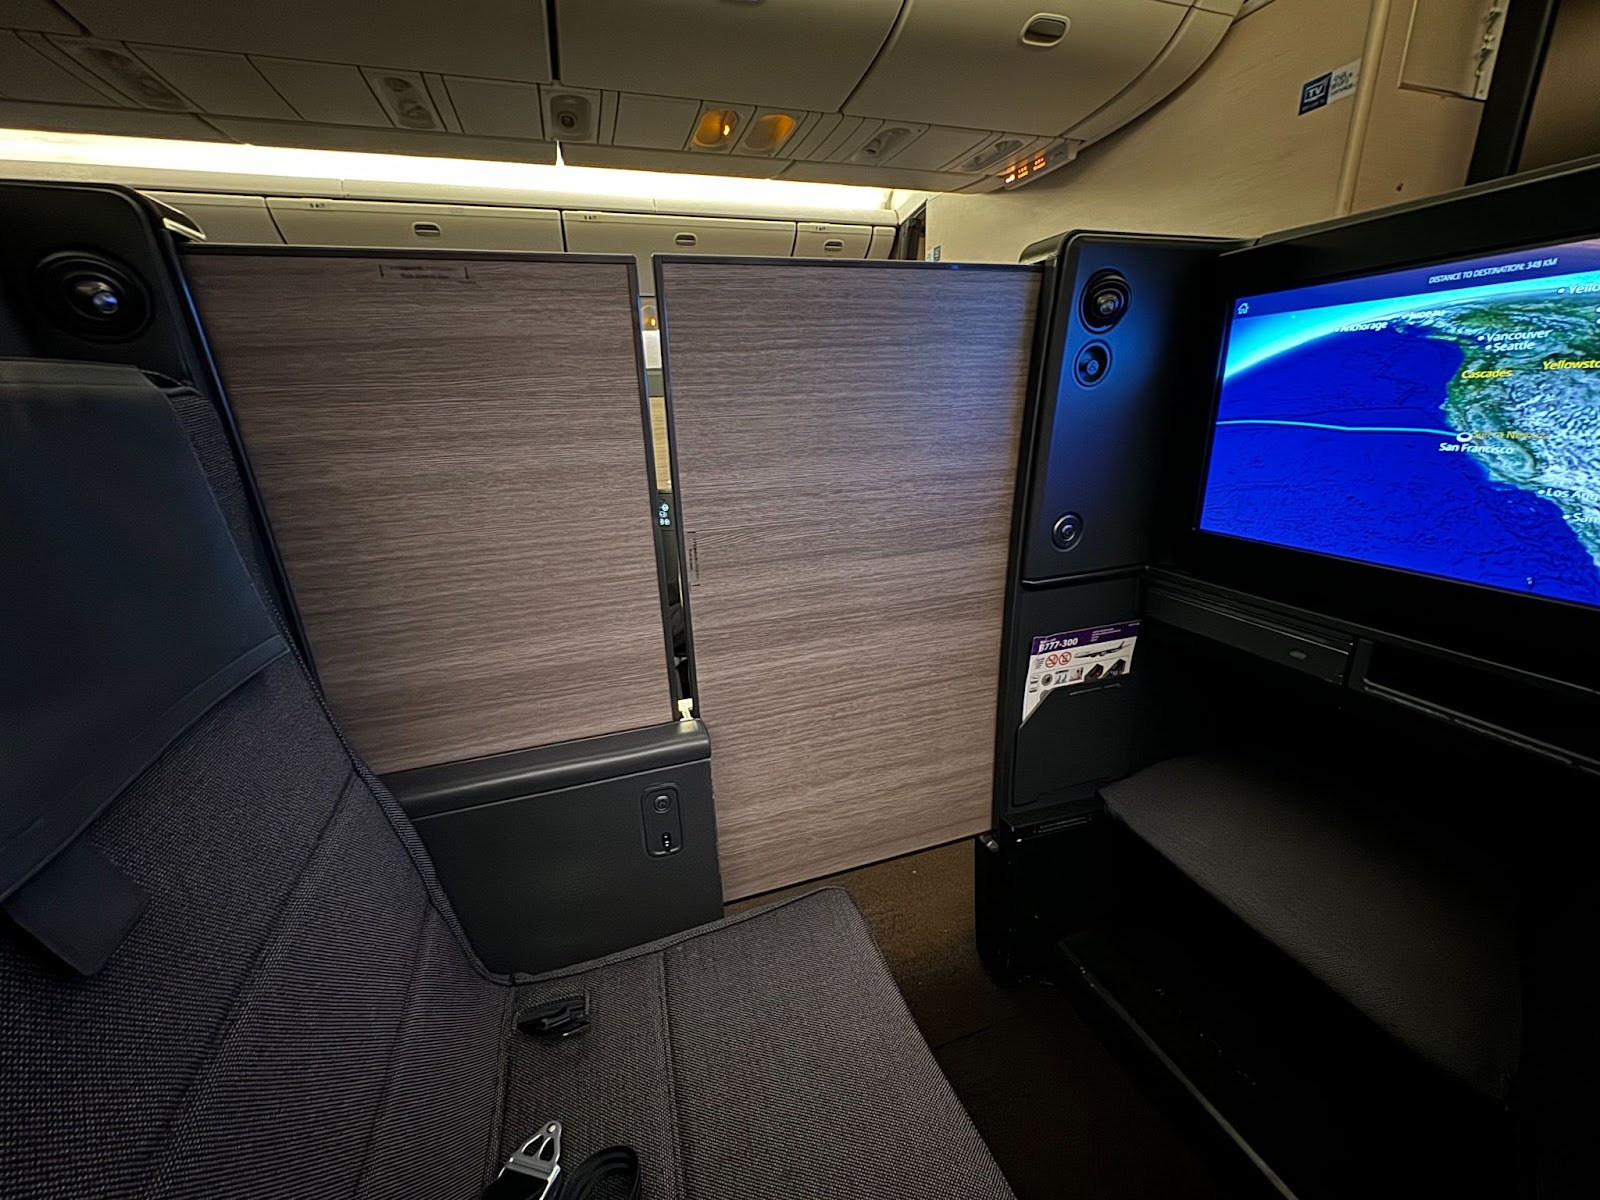 All Nippon Airways "The Room" seat with privacy doors shut